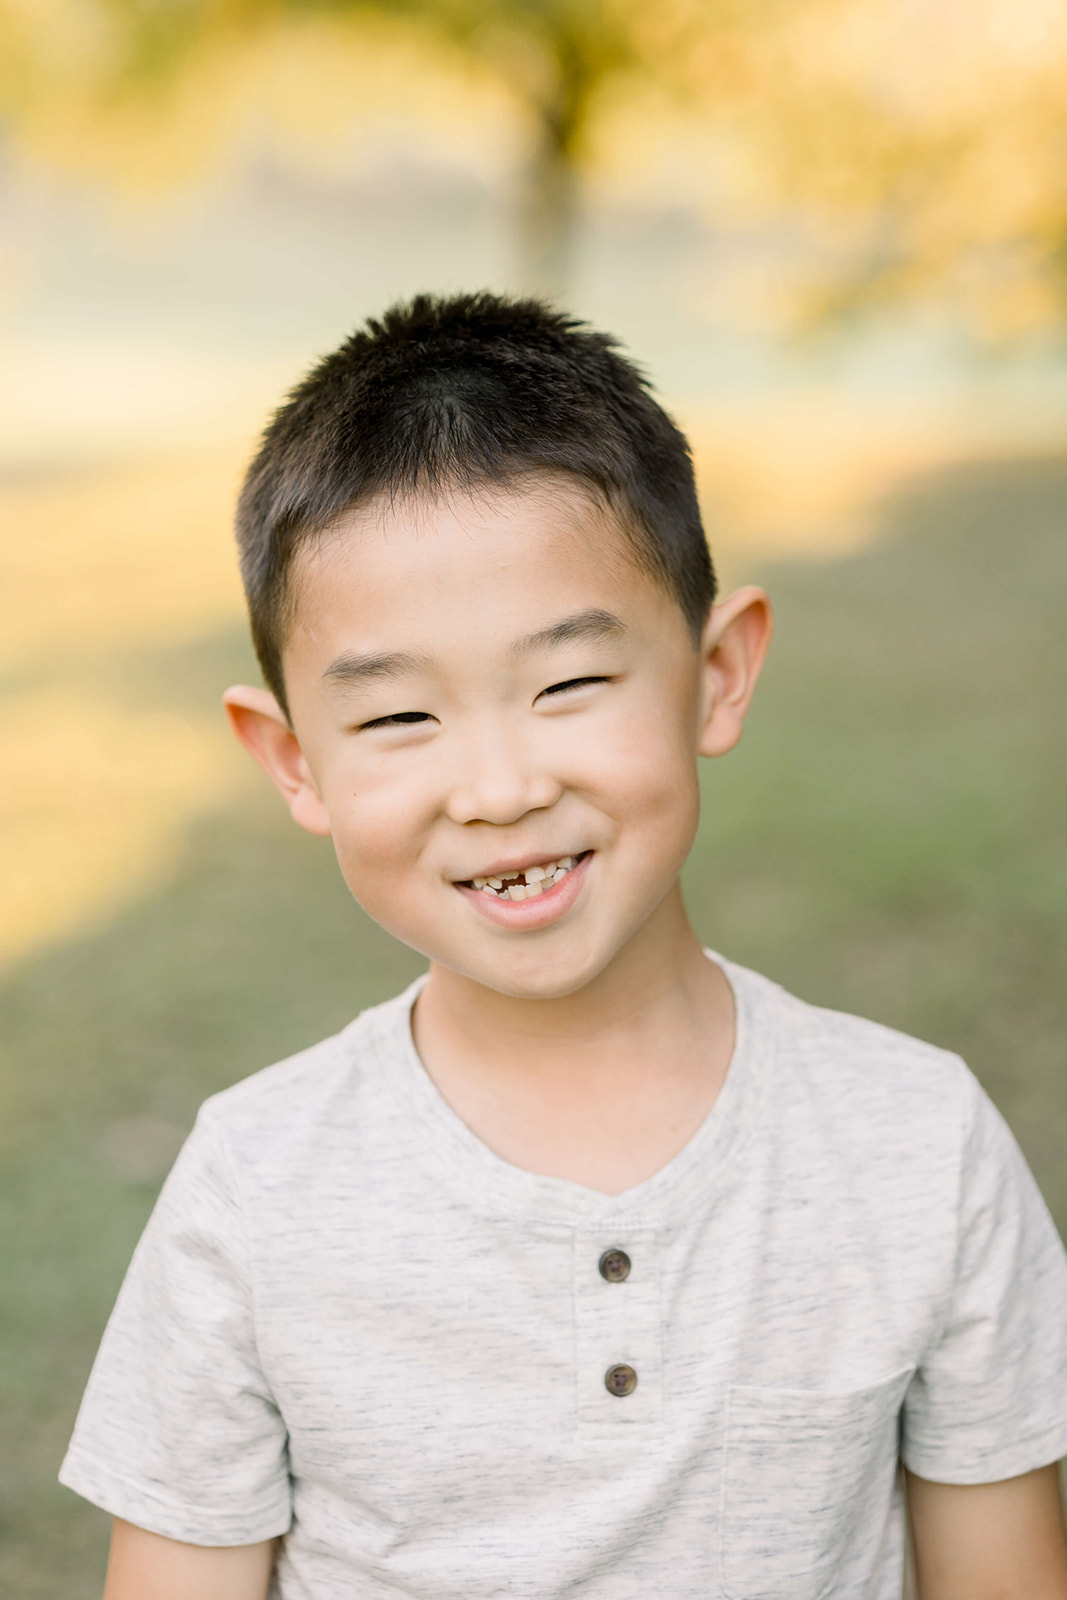 A toddler boy smiles big while missing teeth in a grey shirt in a park at sunset